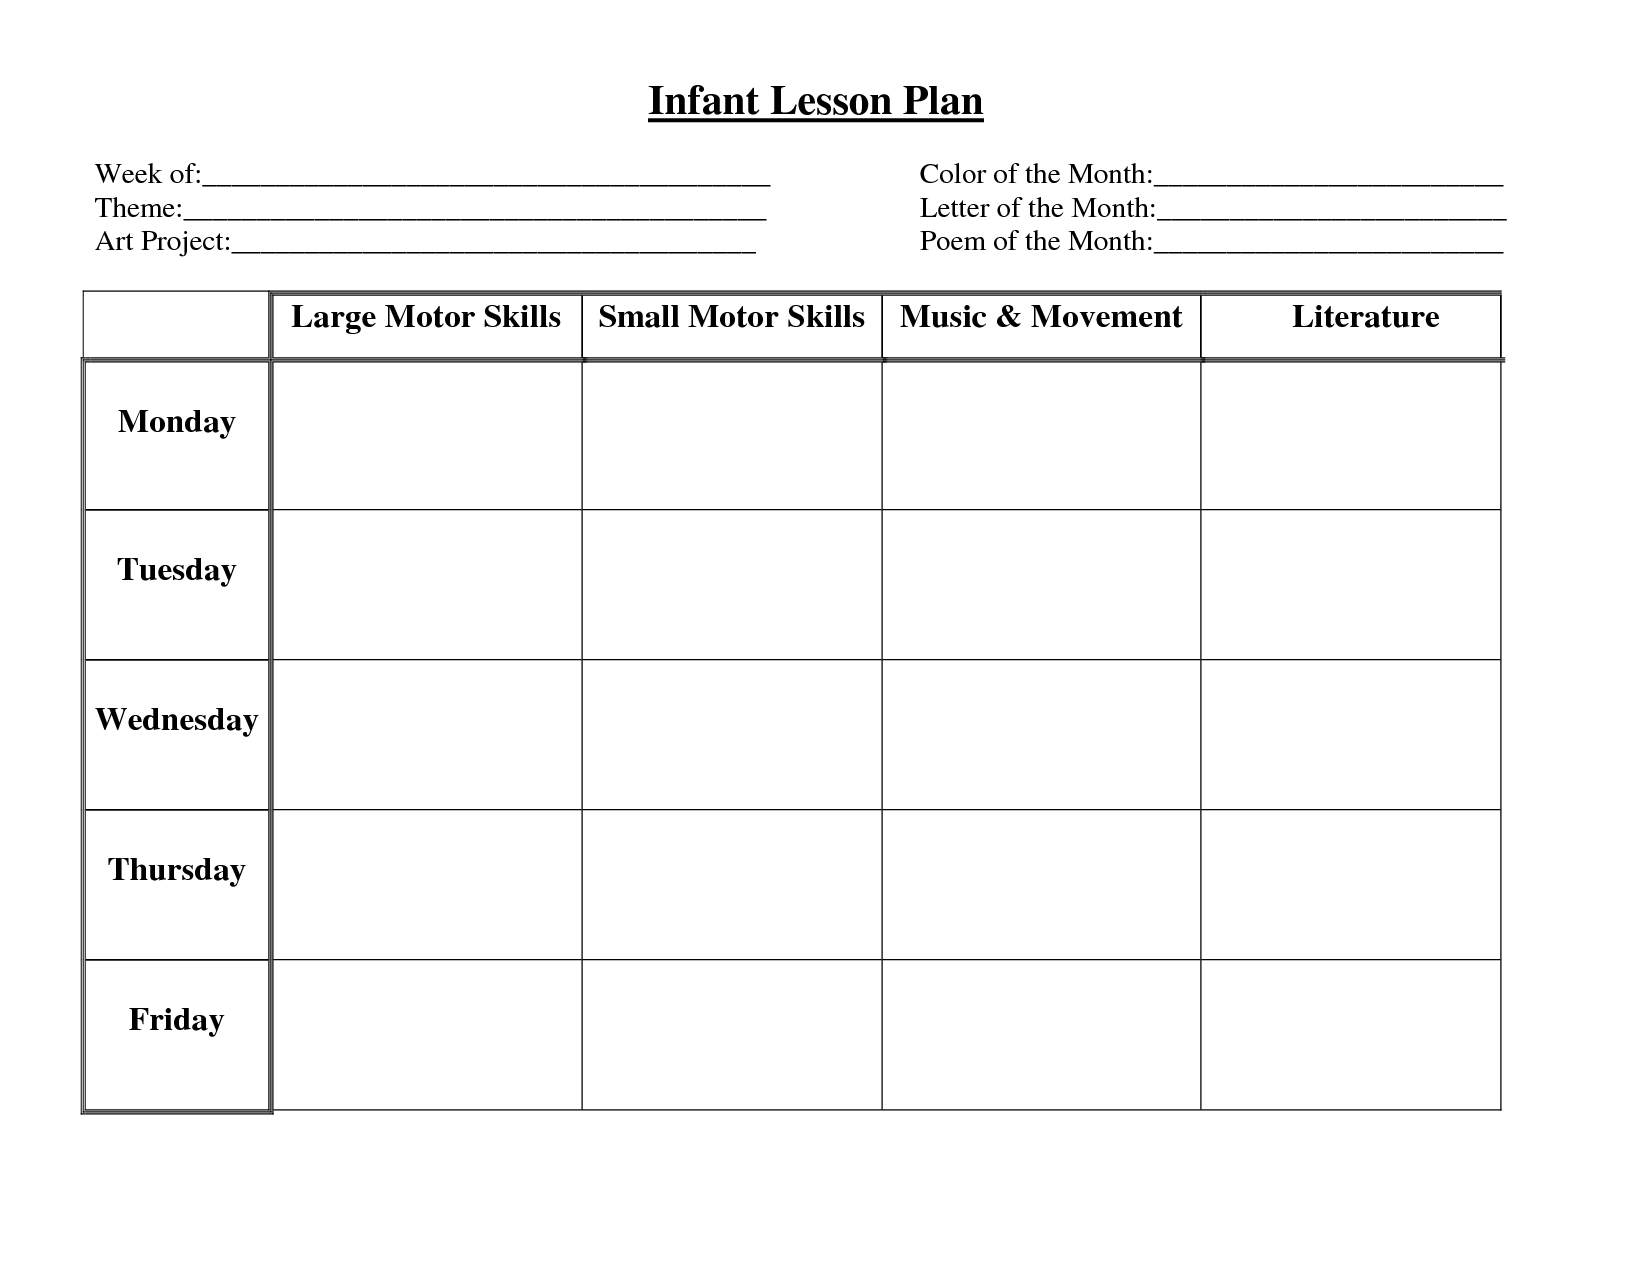 Lesson Plan Form Toddler Pictures To Pin On Pinterest with Monthly Lesson Plan Template 2019